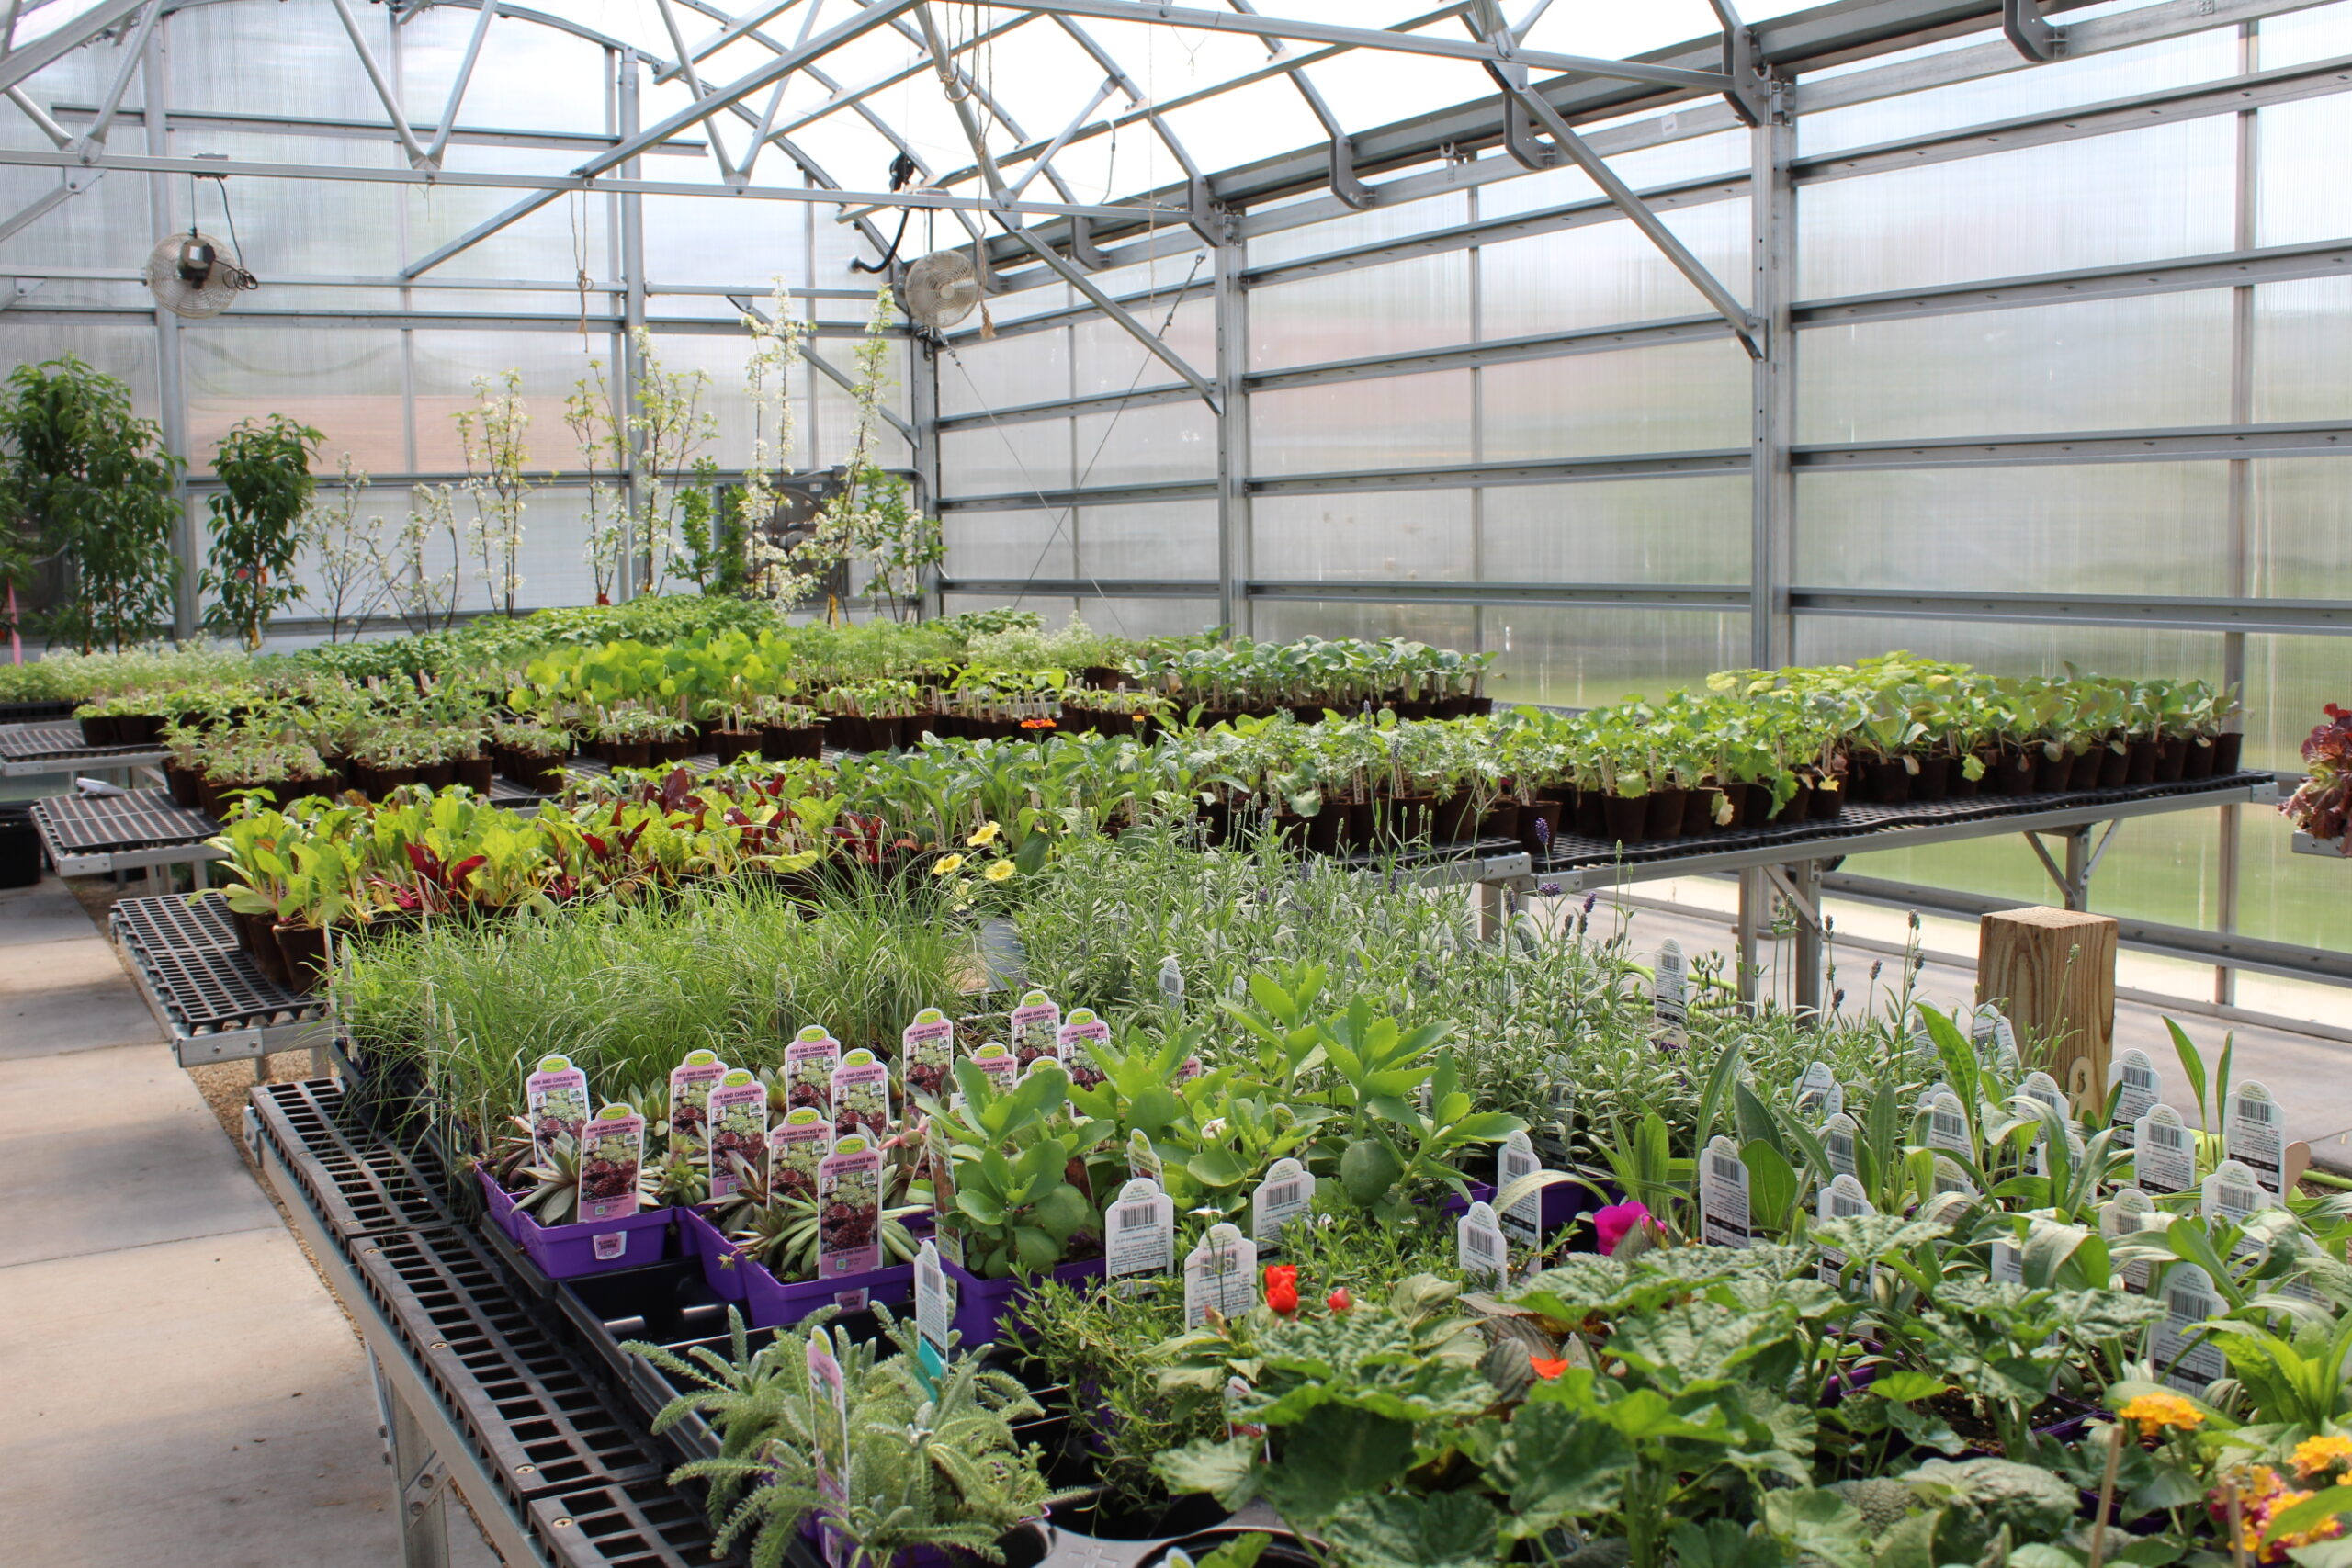 Our Annual Plant Sale is May 4th!